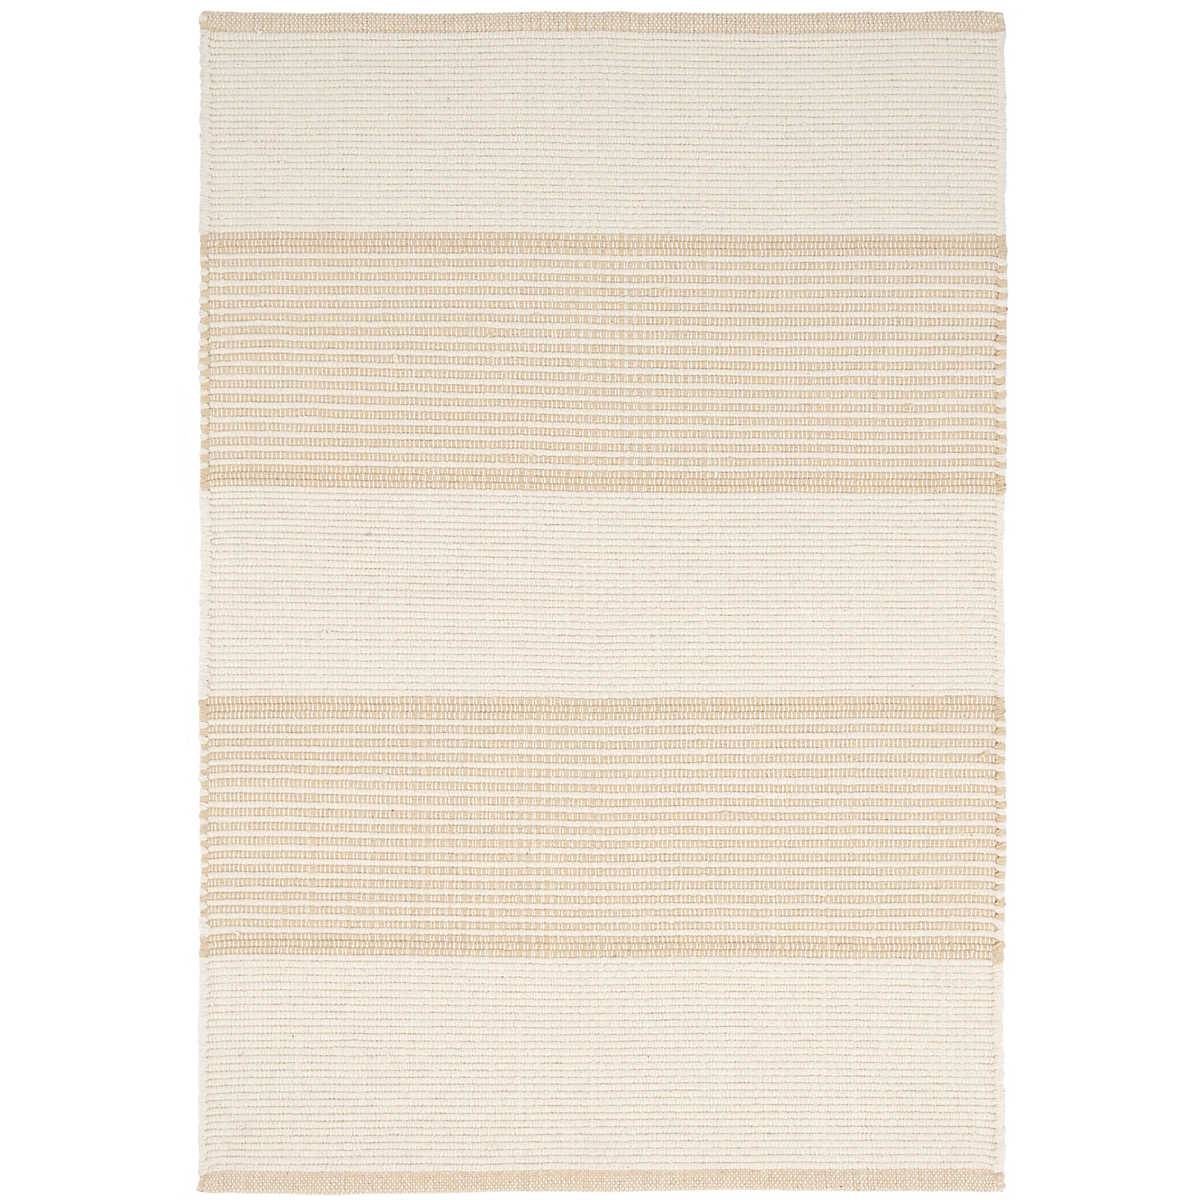 Wide bands of micro stripes, structured with crisp, banded edges on an ivory ground, bring modern balance and subtle texture to this woven cotton area rug. Constructed using a hand loomed flat weave in durable 100% cotton, and available in a choice of navy, Asiatic blue or wheat, it is perfectly designed to make a style statement in any space. Amethyst Home provides interior design services, furniture, rugs, and lighting in the Seattle metro area.